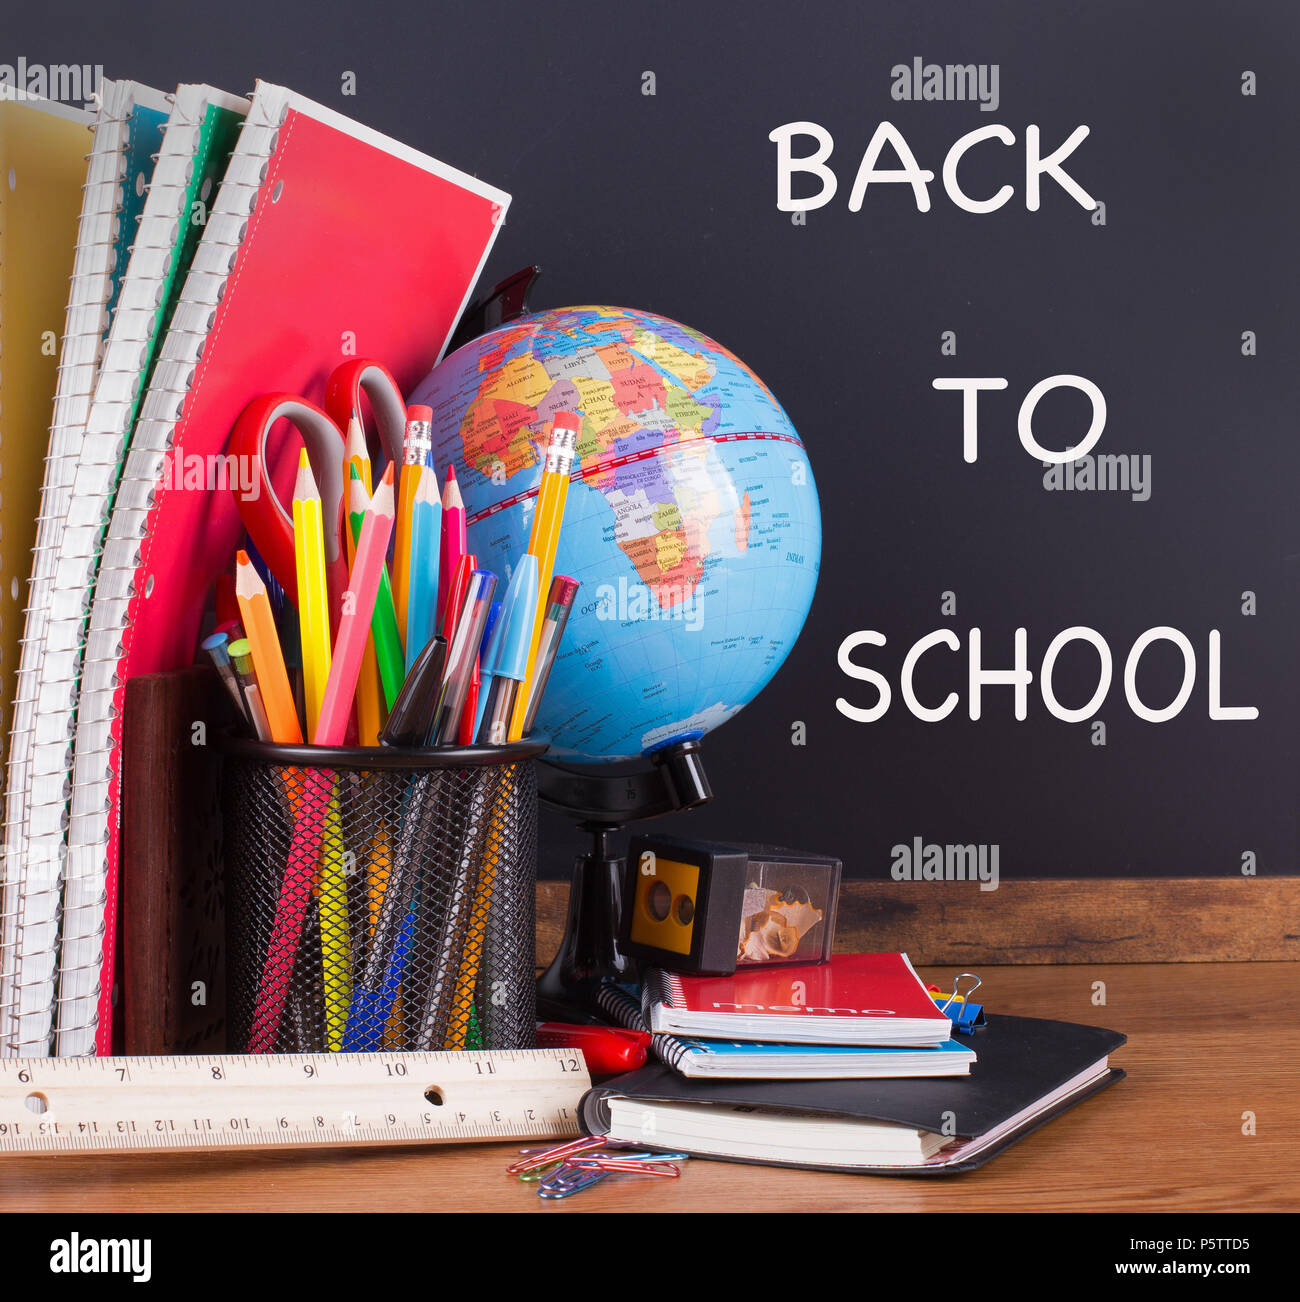 School accessories on a wooden desktop with BACK TO SCHOOL text written on a blackboard in background Stock Photo